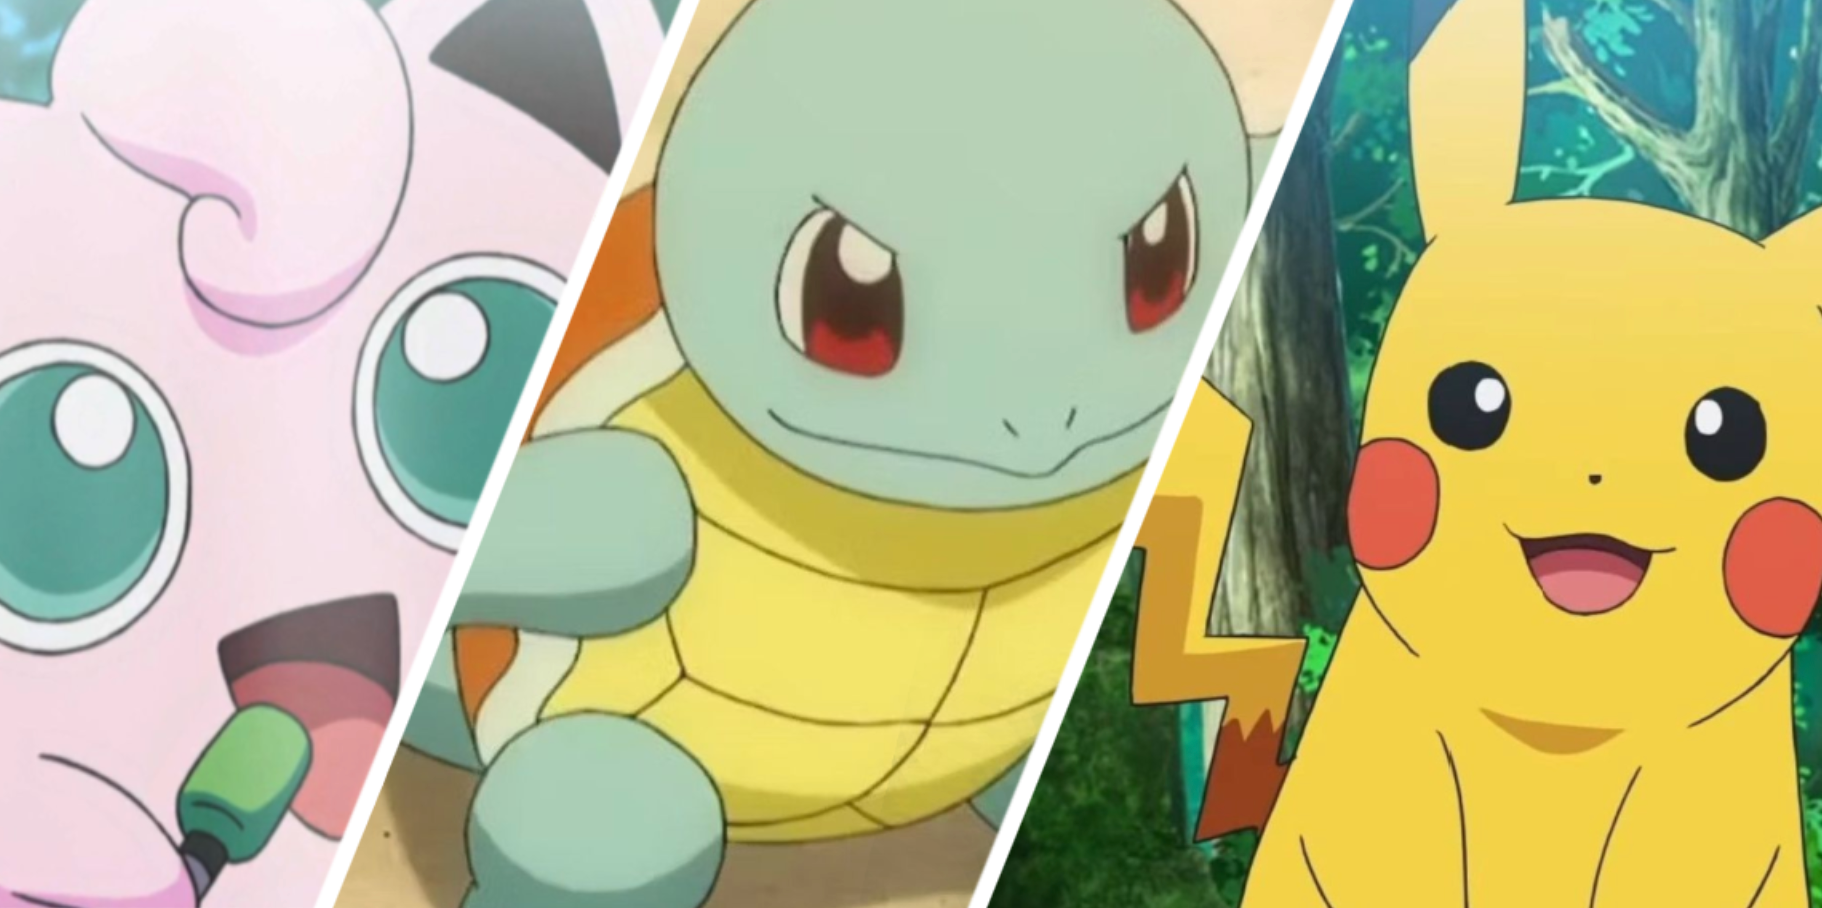 We Choose You: The 10 Cutest Pokémon of All Time